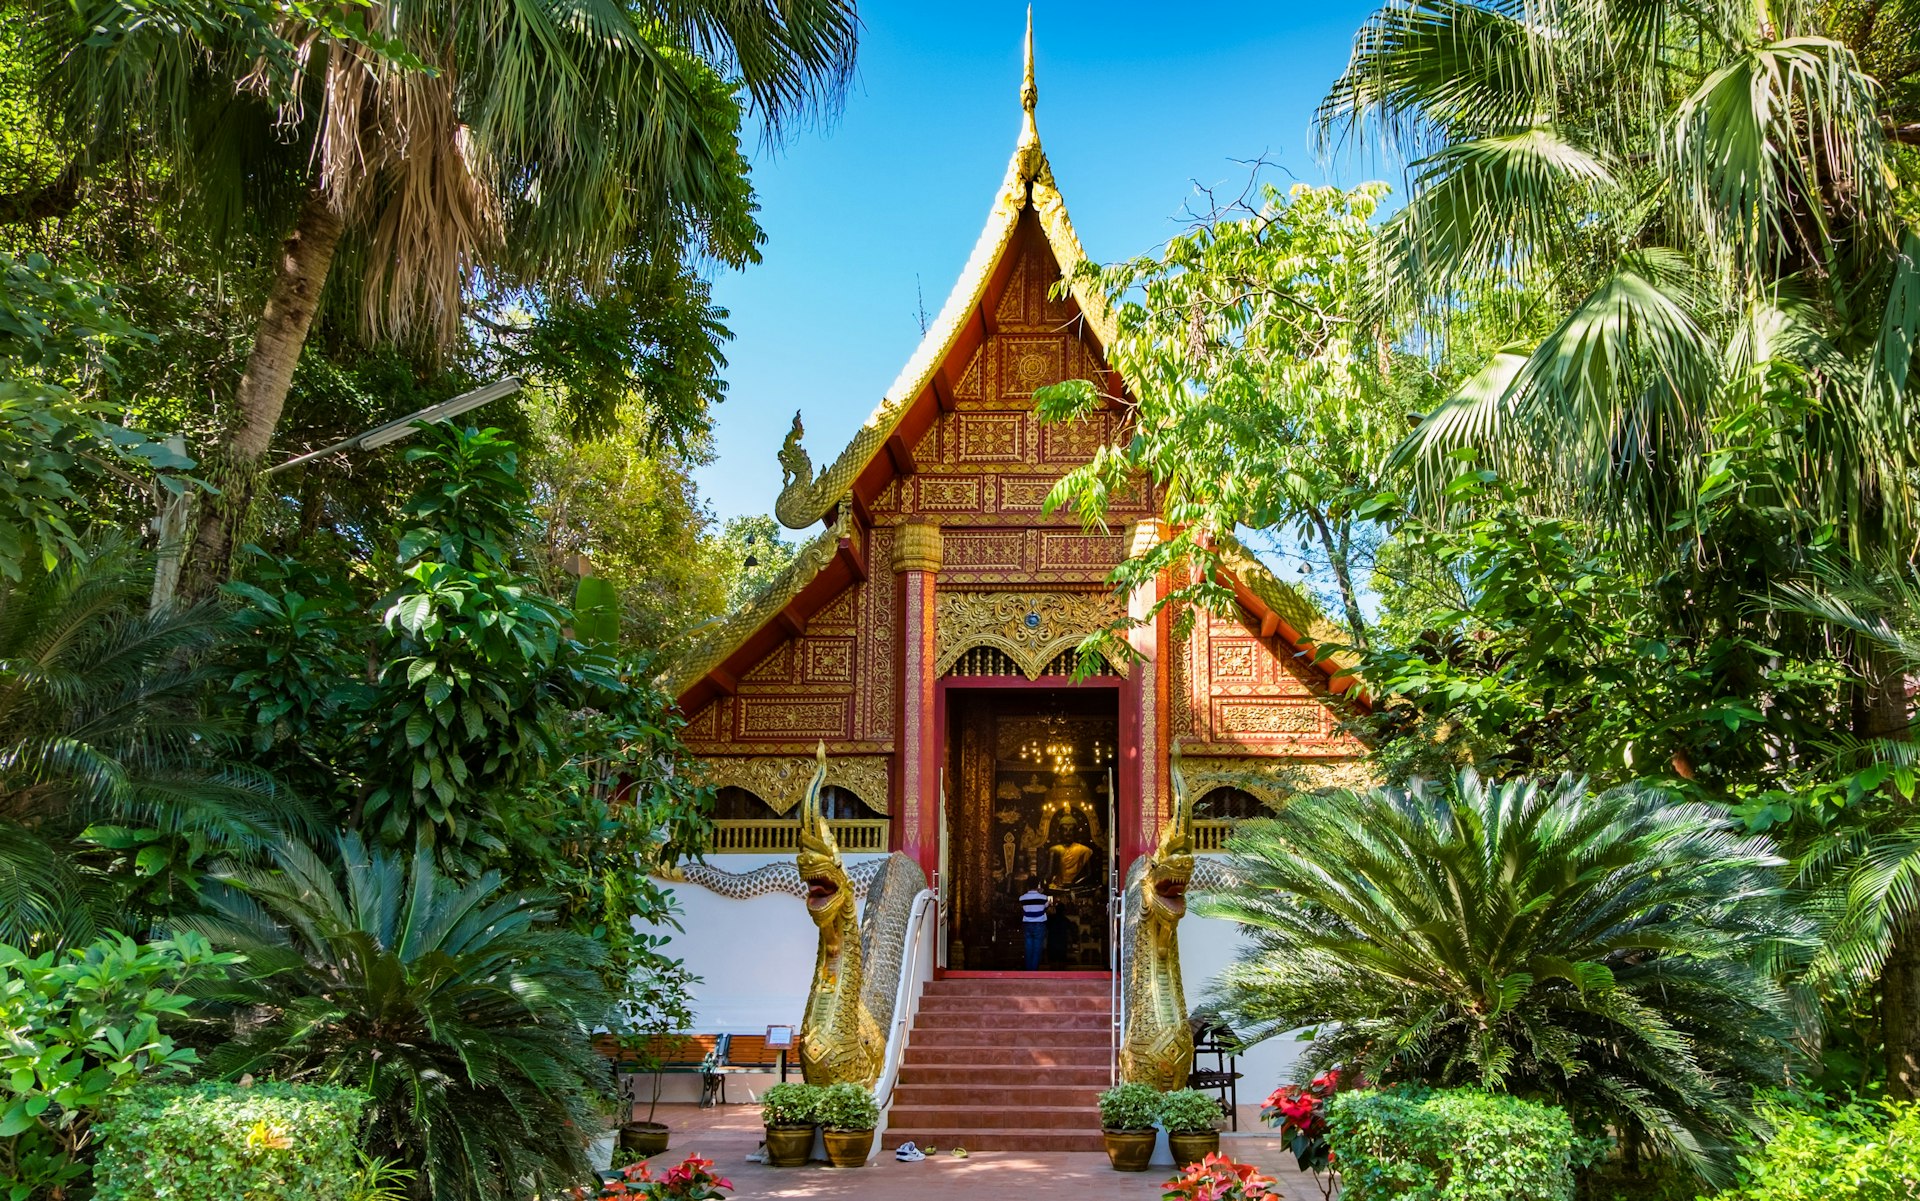 Wat Phra Kaew temple: a small sloping-roofed building, adorned in gold leaf and surrounded by trees and plants.